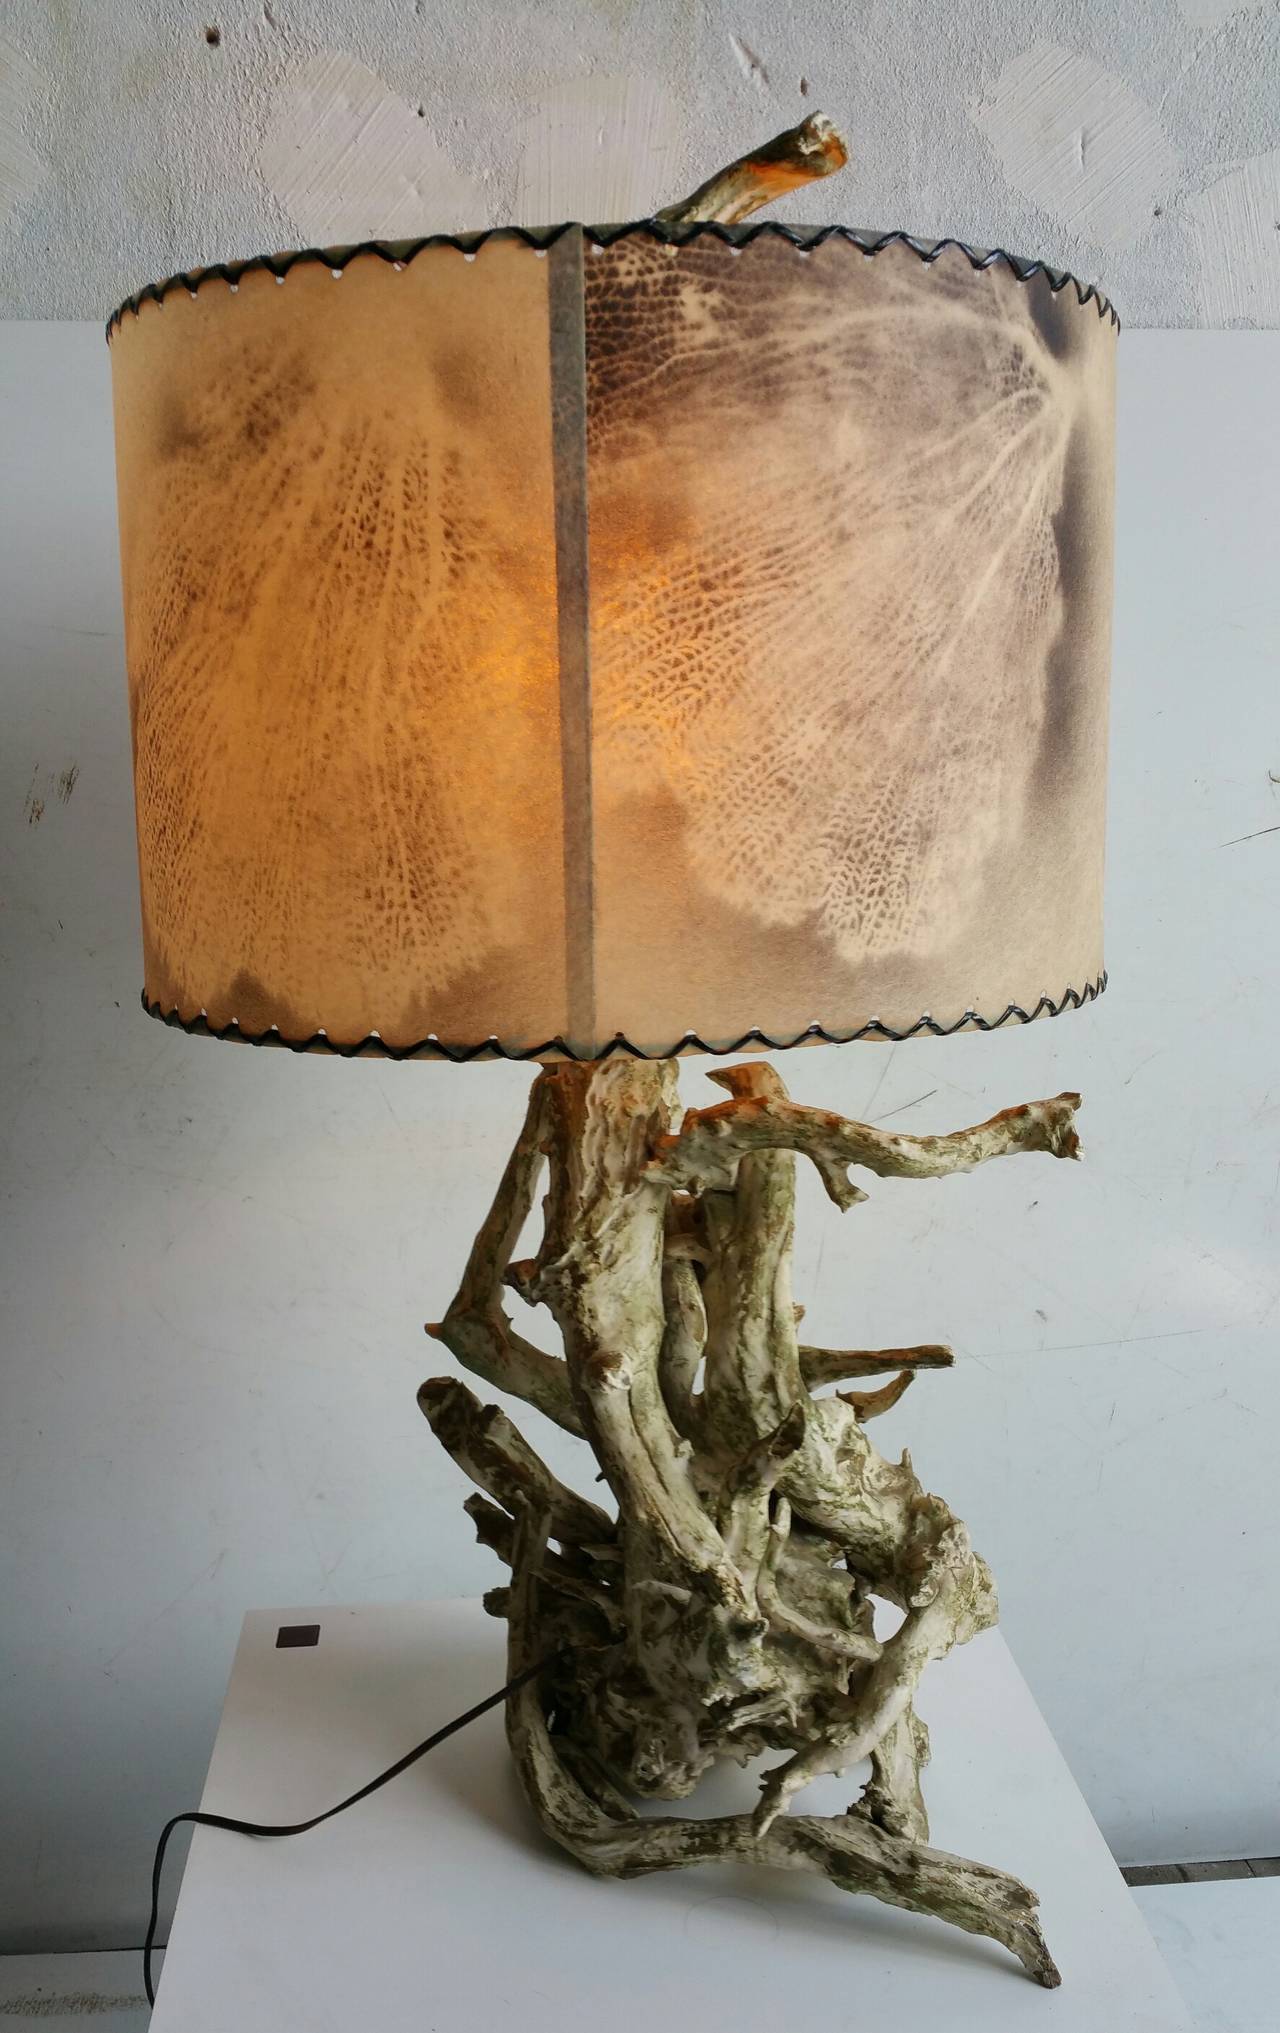 Classic Mid Century Modern Driftwood Lamp..Beautiful painted finish,,Original partchment lamp shade,, Also retains original matching driftwood finial,